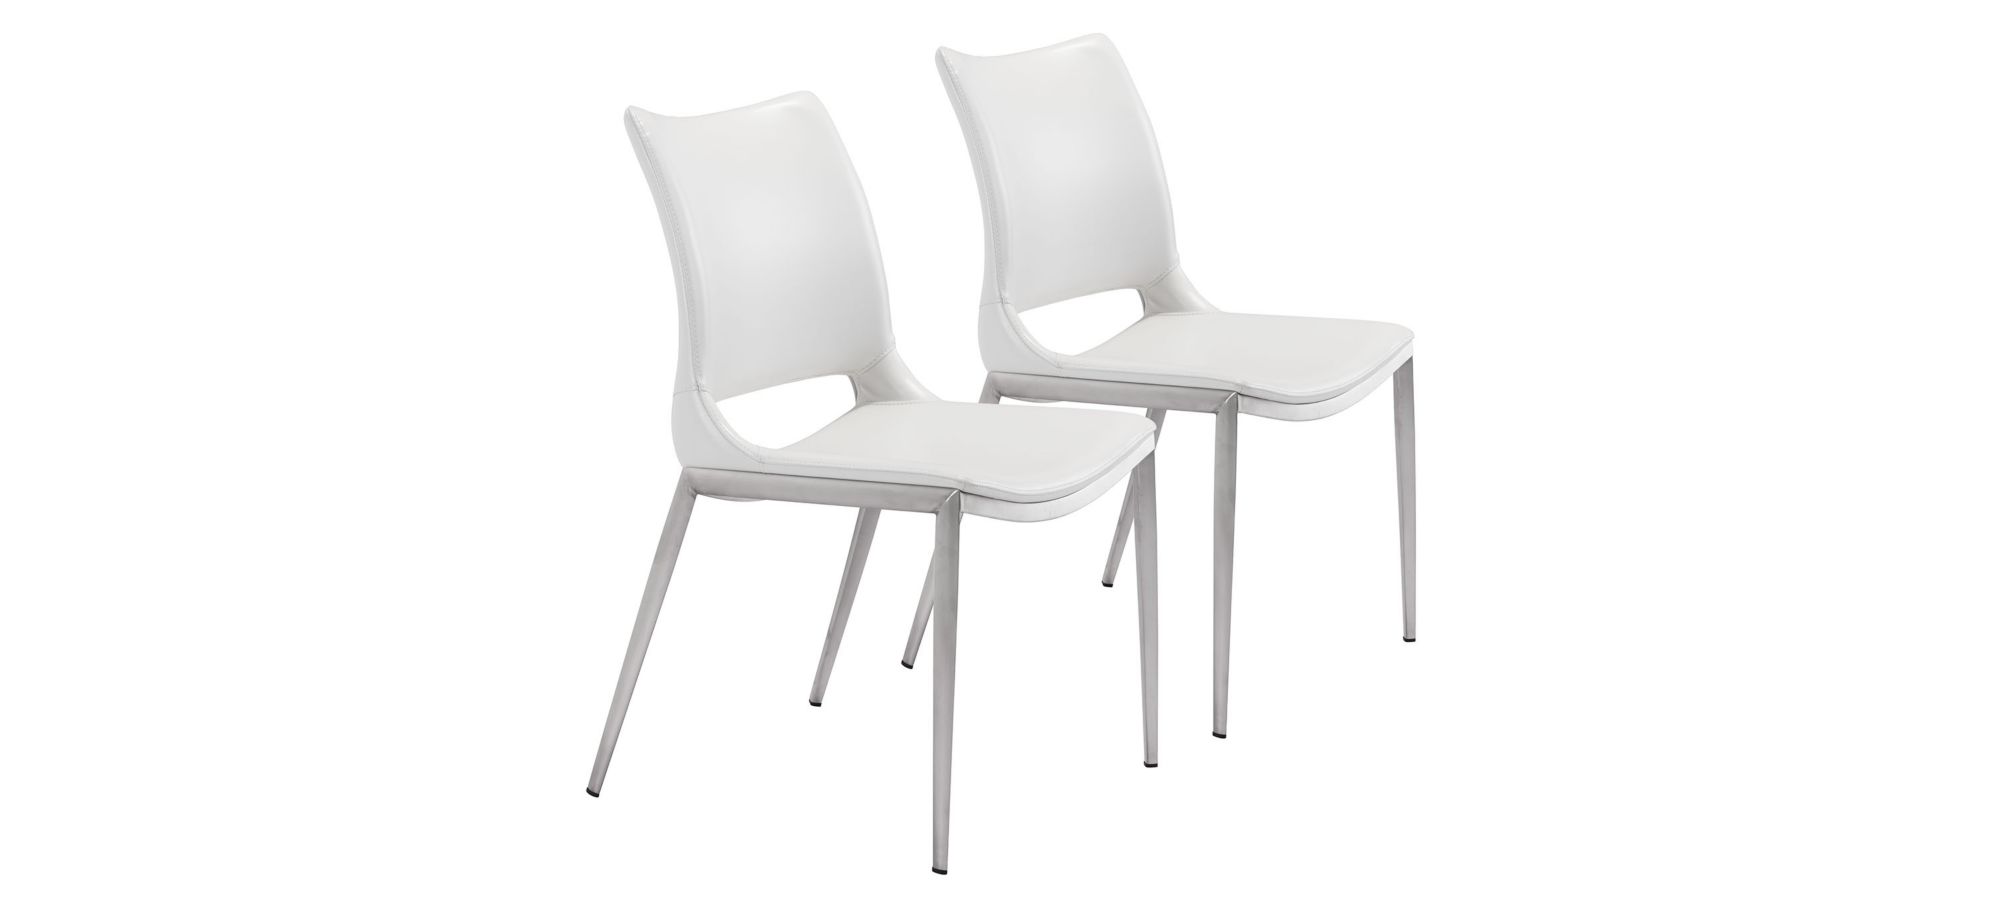 Ace Dining Chair: Set of 2 in White, Silver by Zuo Modern